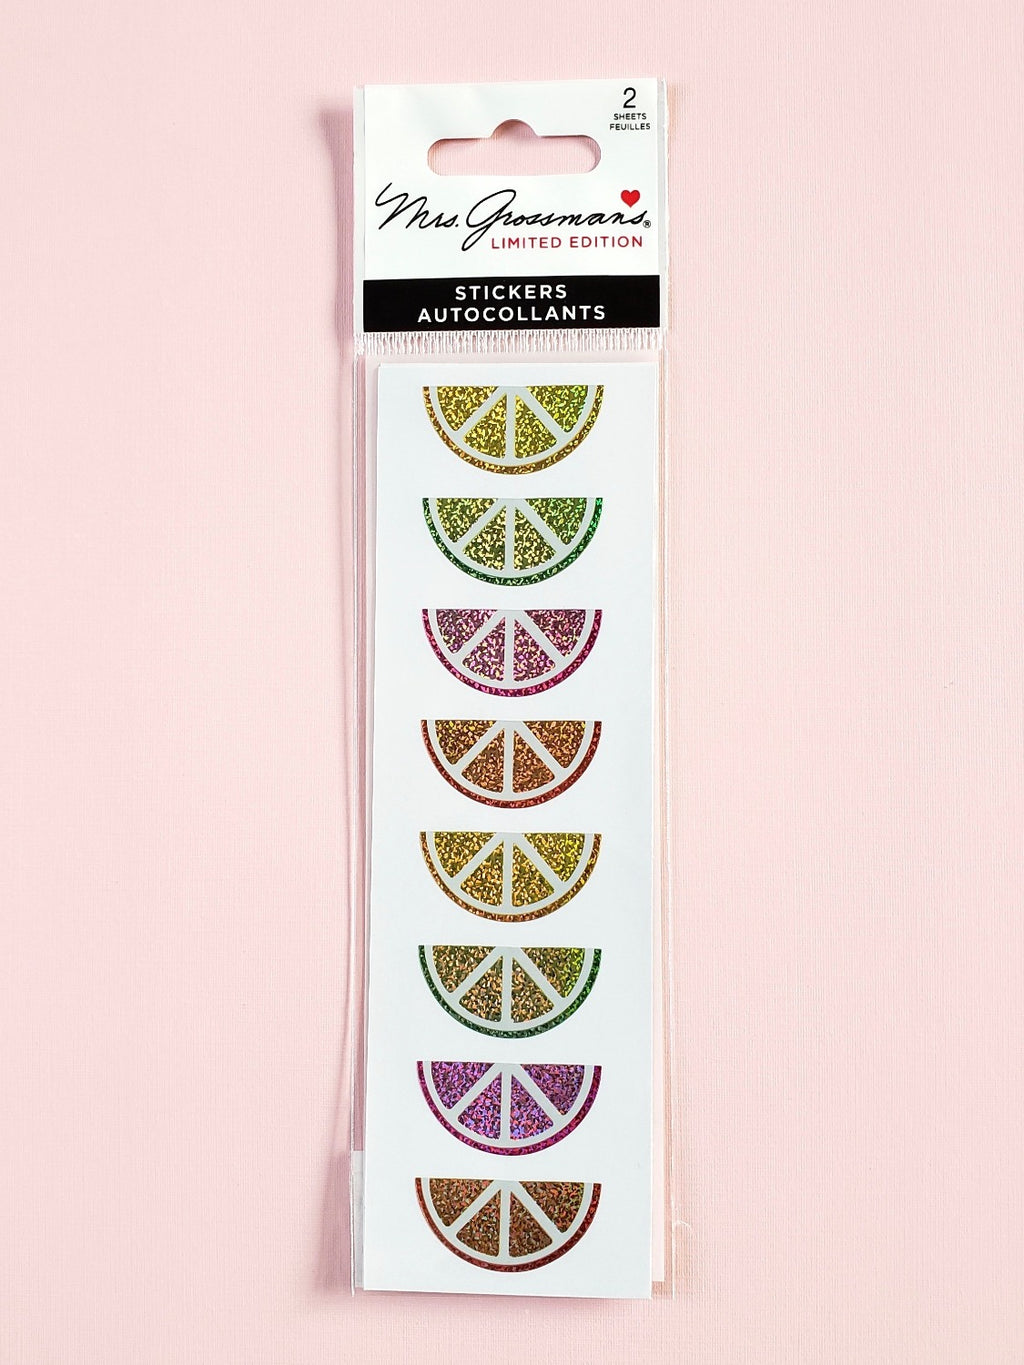 Mrs Grossman's limited edition sparkly citrus slices stickers